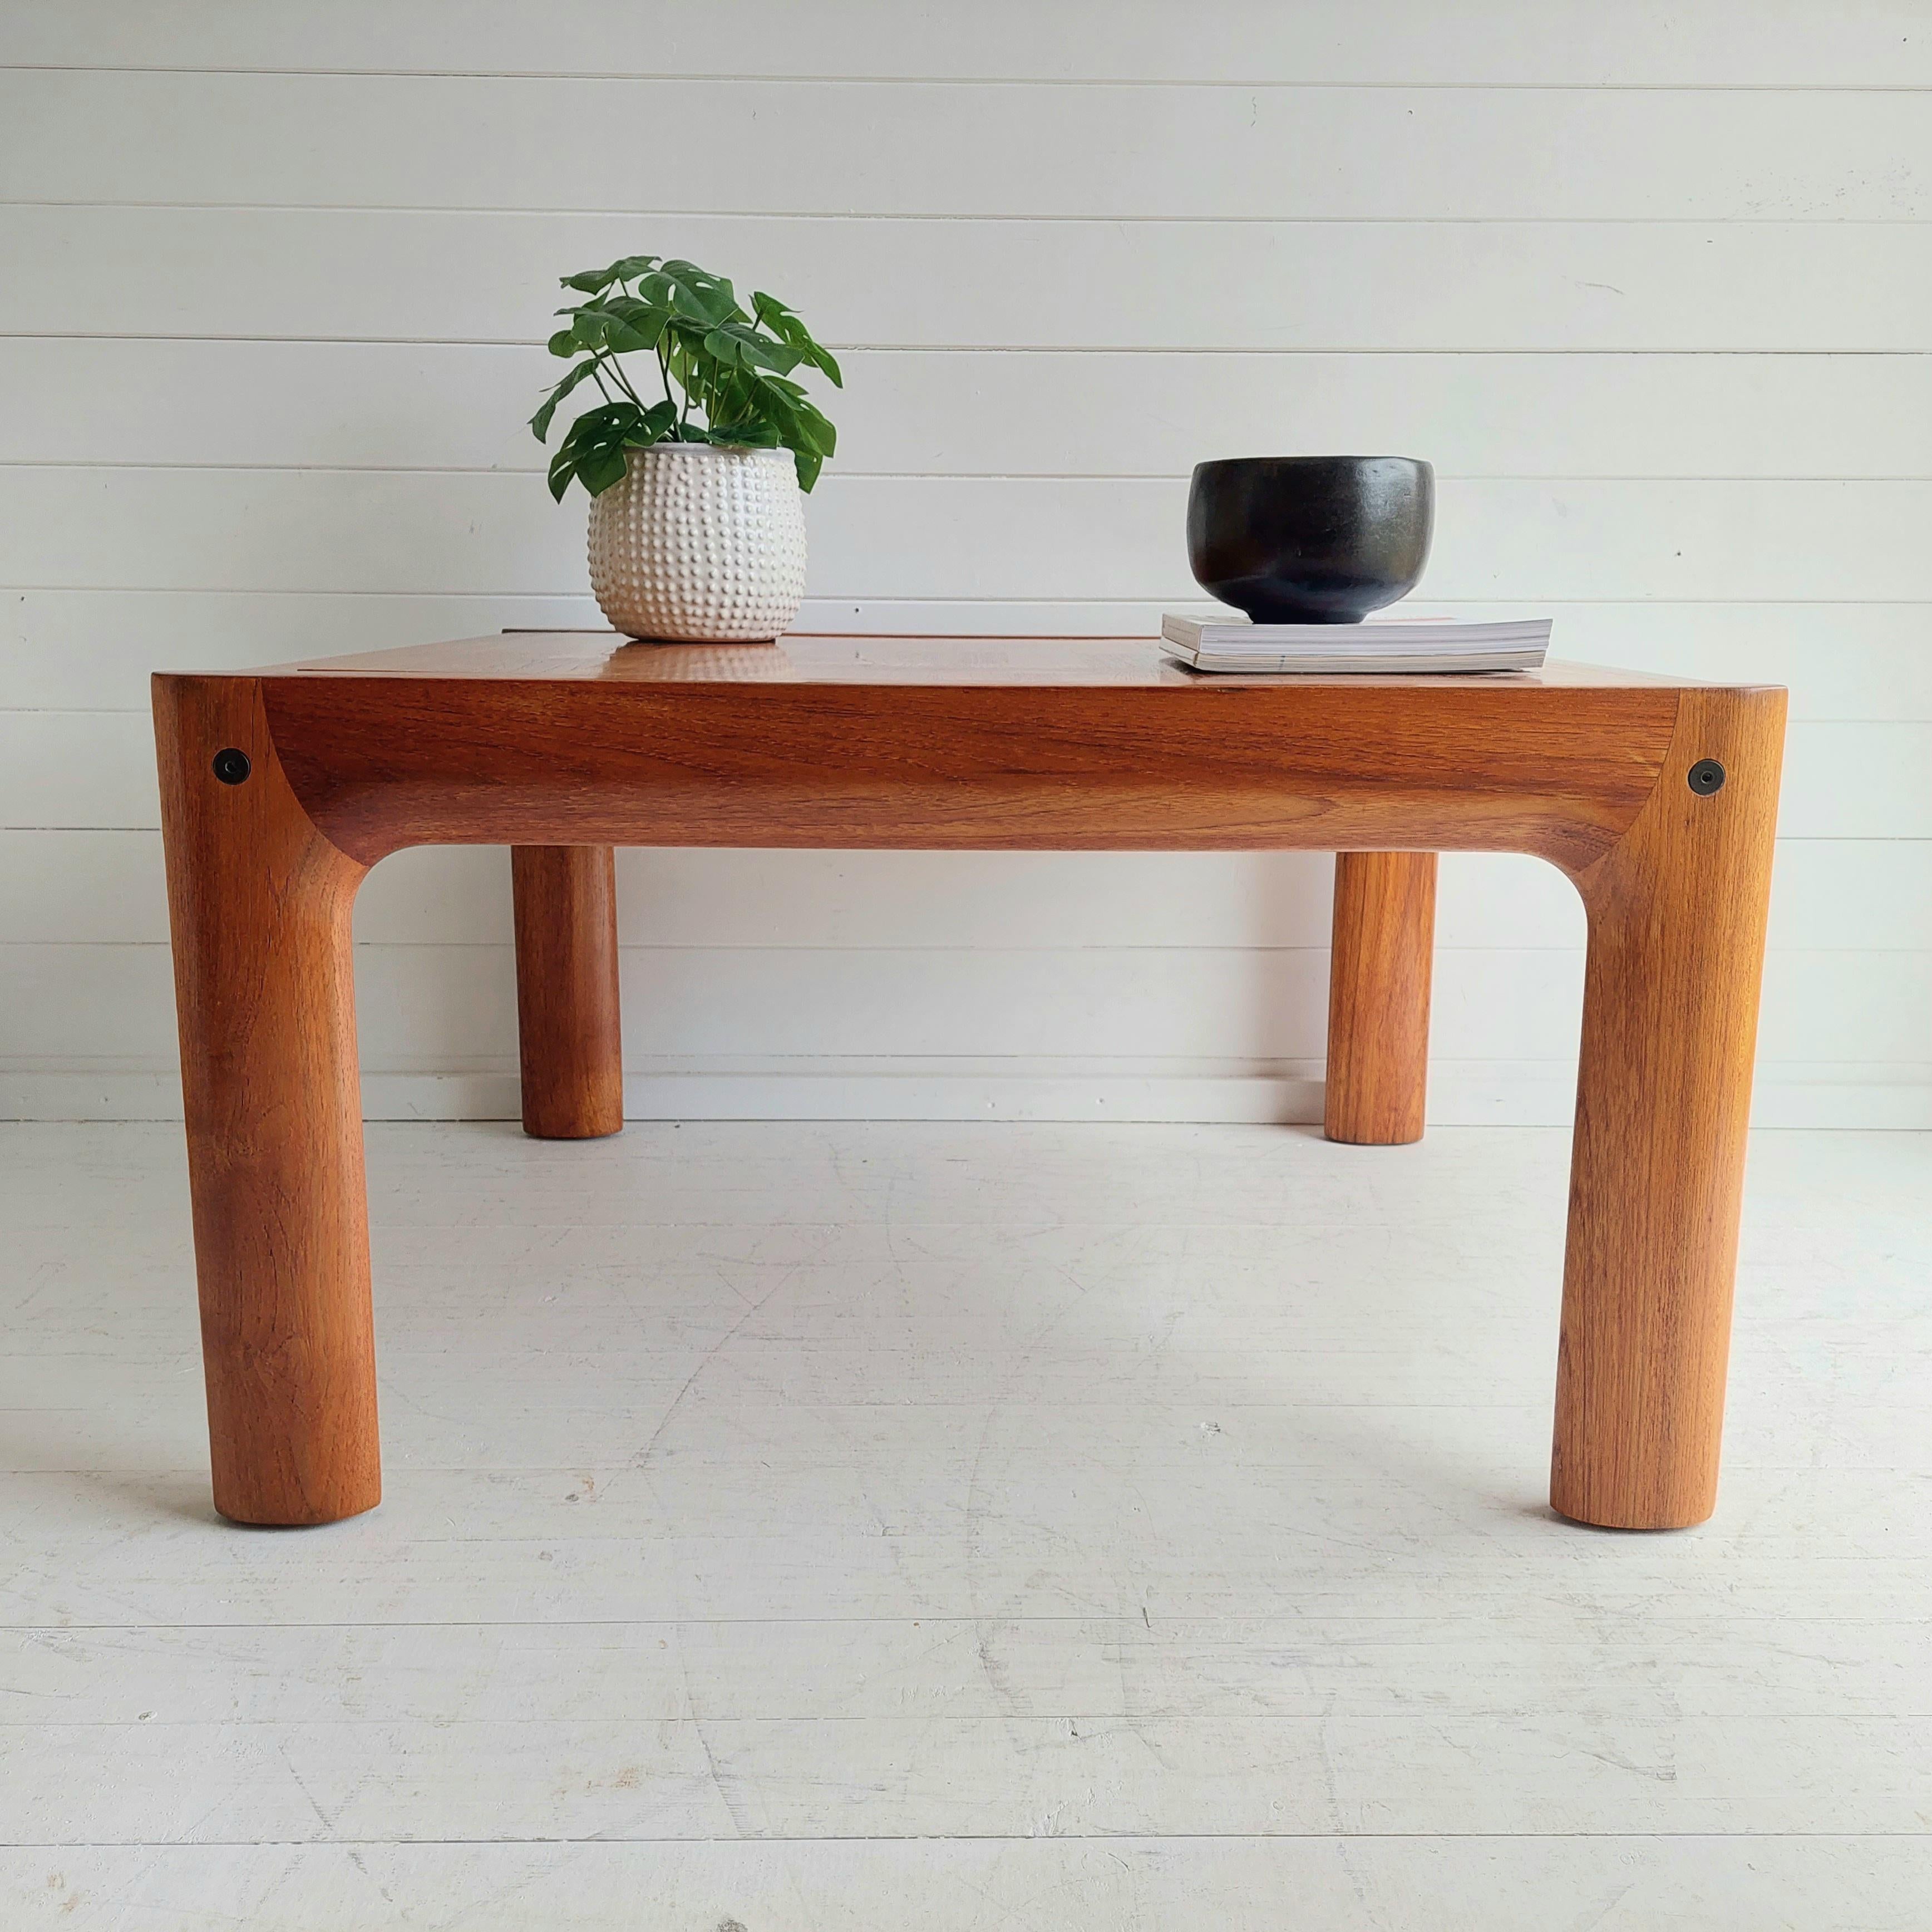 Rectangle nerly Square Asko oak coffee table by famed Finnish design company, Asko. 
Scandinavian design from the 70s

The design is simply, unique and impressive. 
Denotes robustness, having simple and organic lines at the same time.
This is a